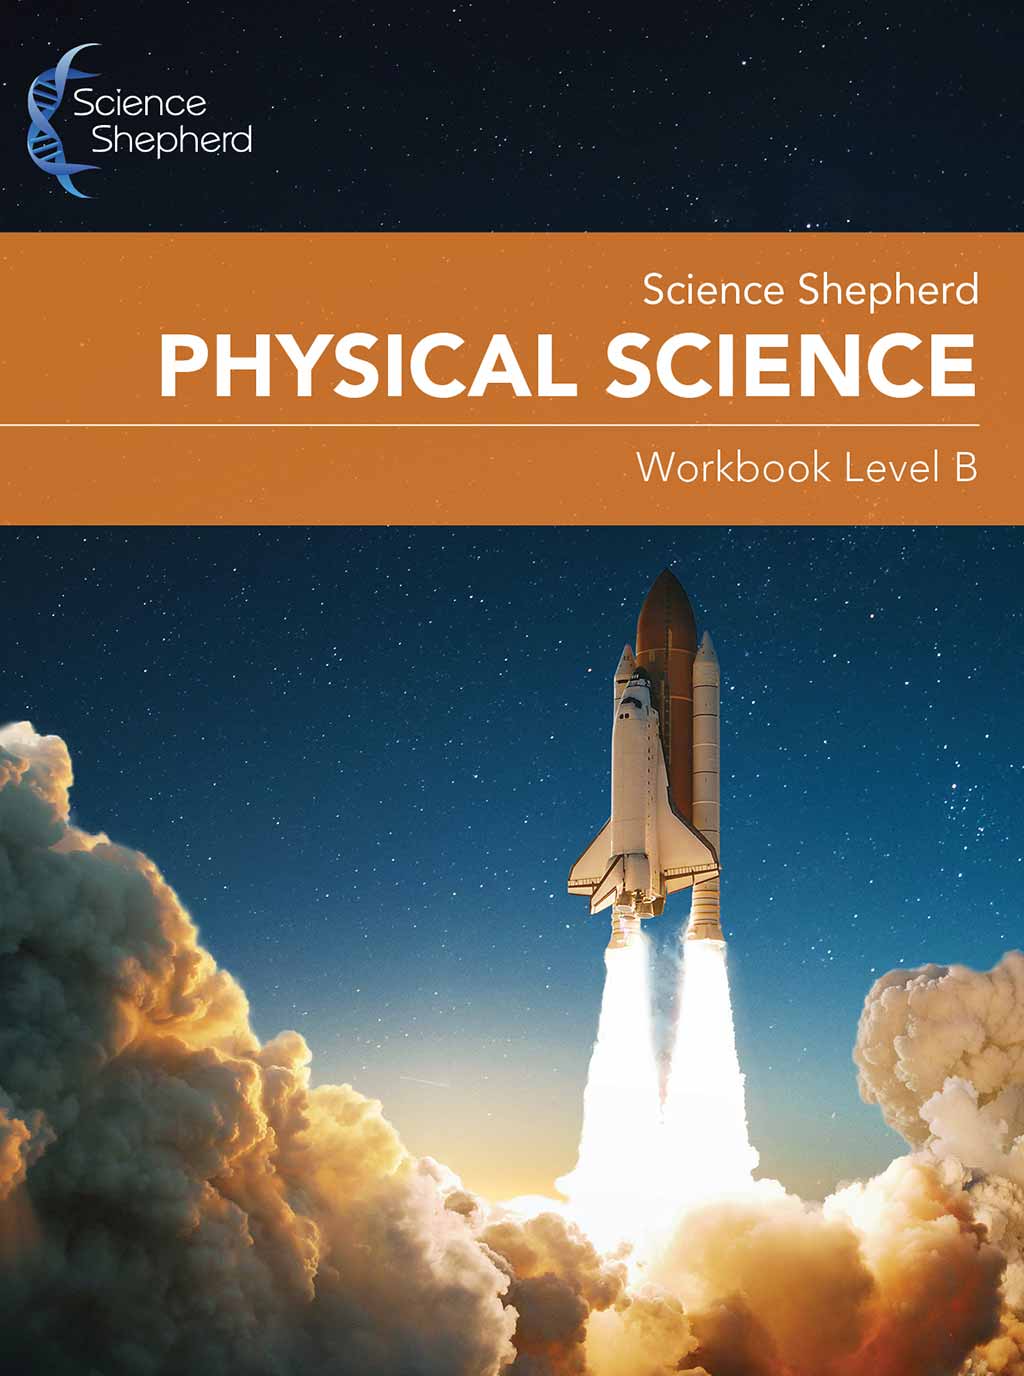 4th grade homeschool Physical Science Workbook Level B cover of a space shuttle launch at night